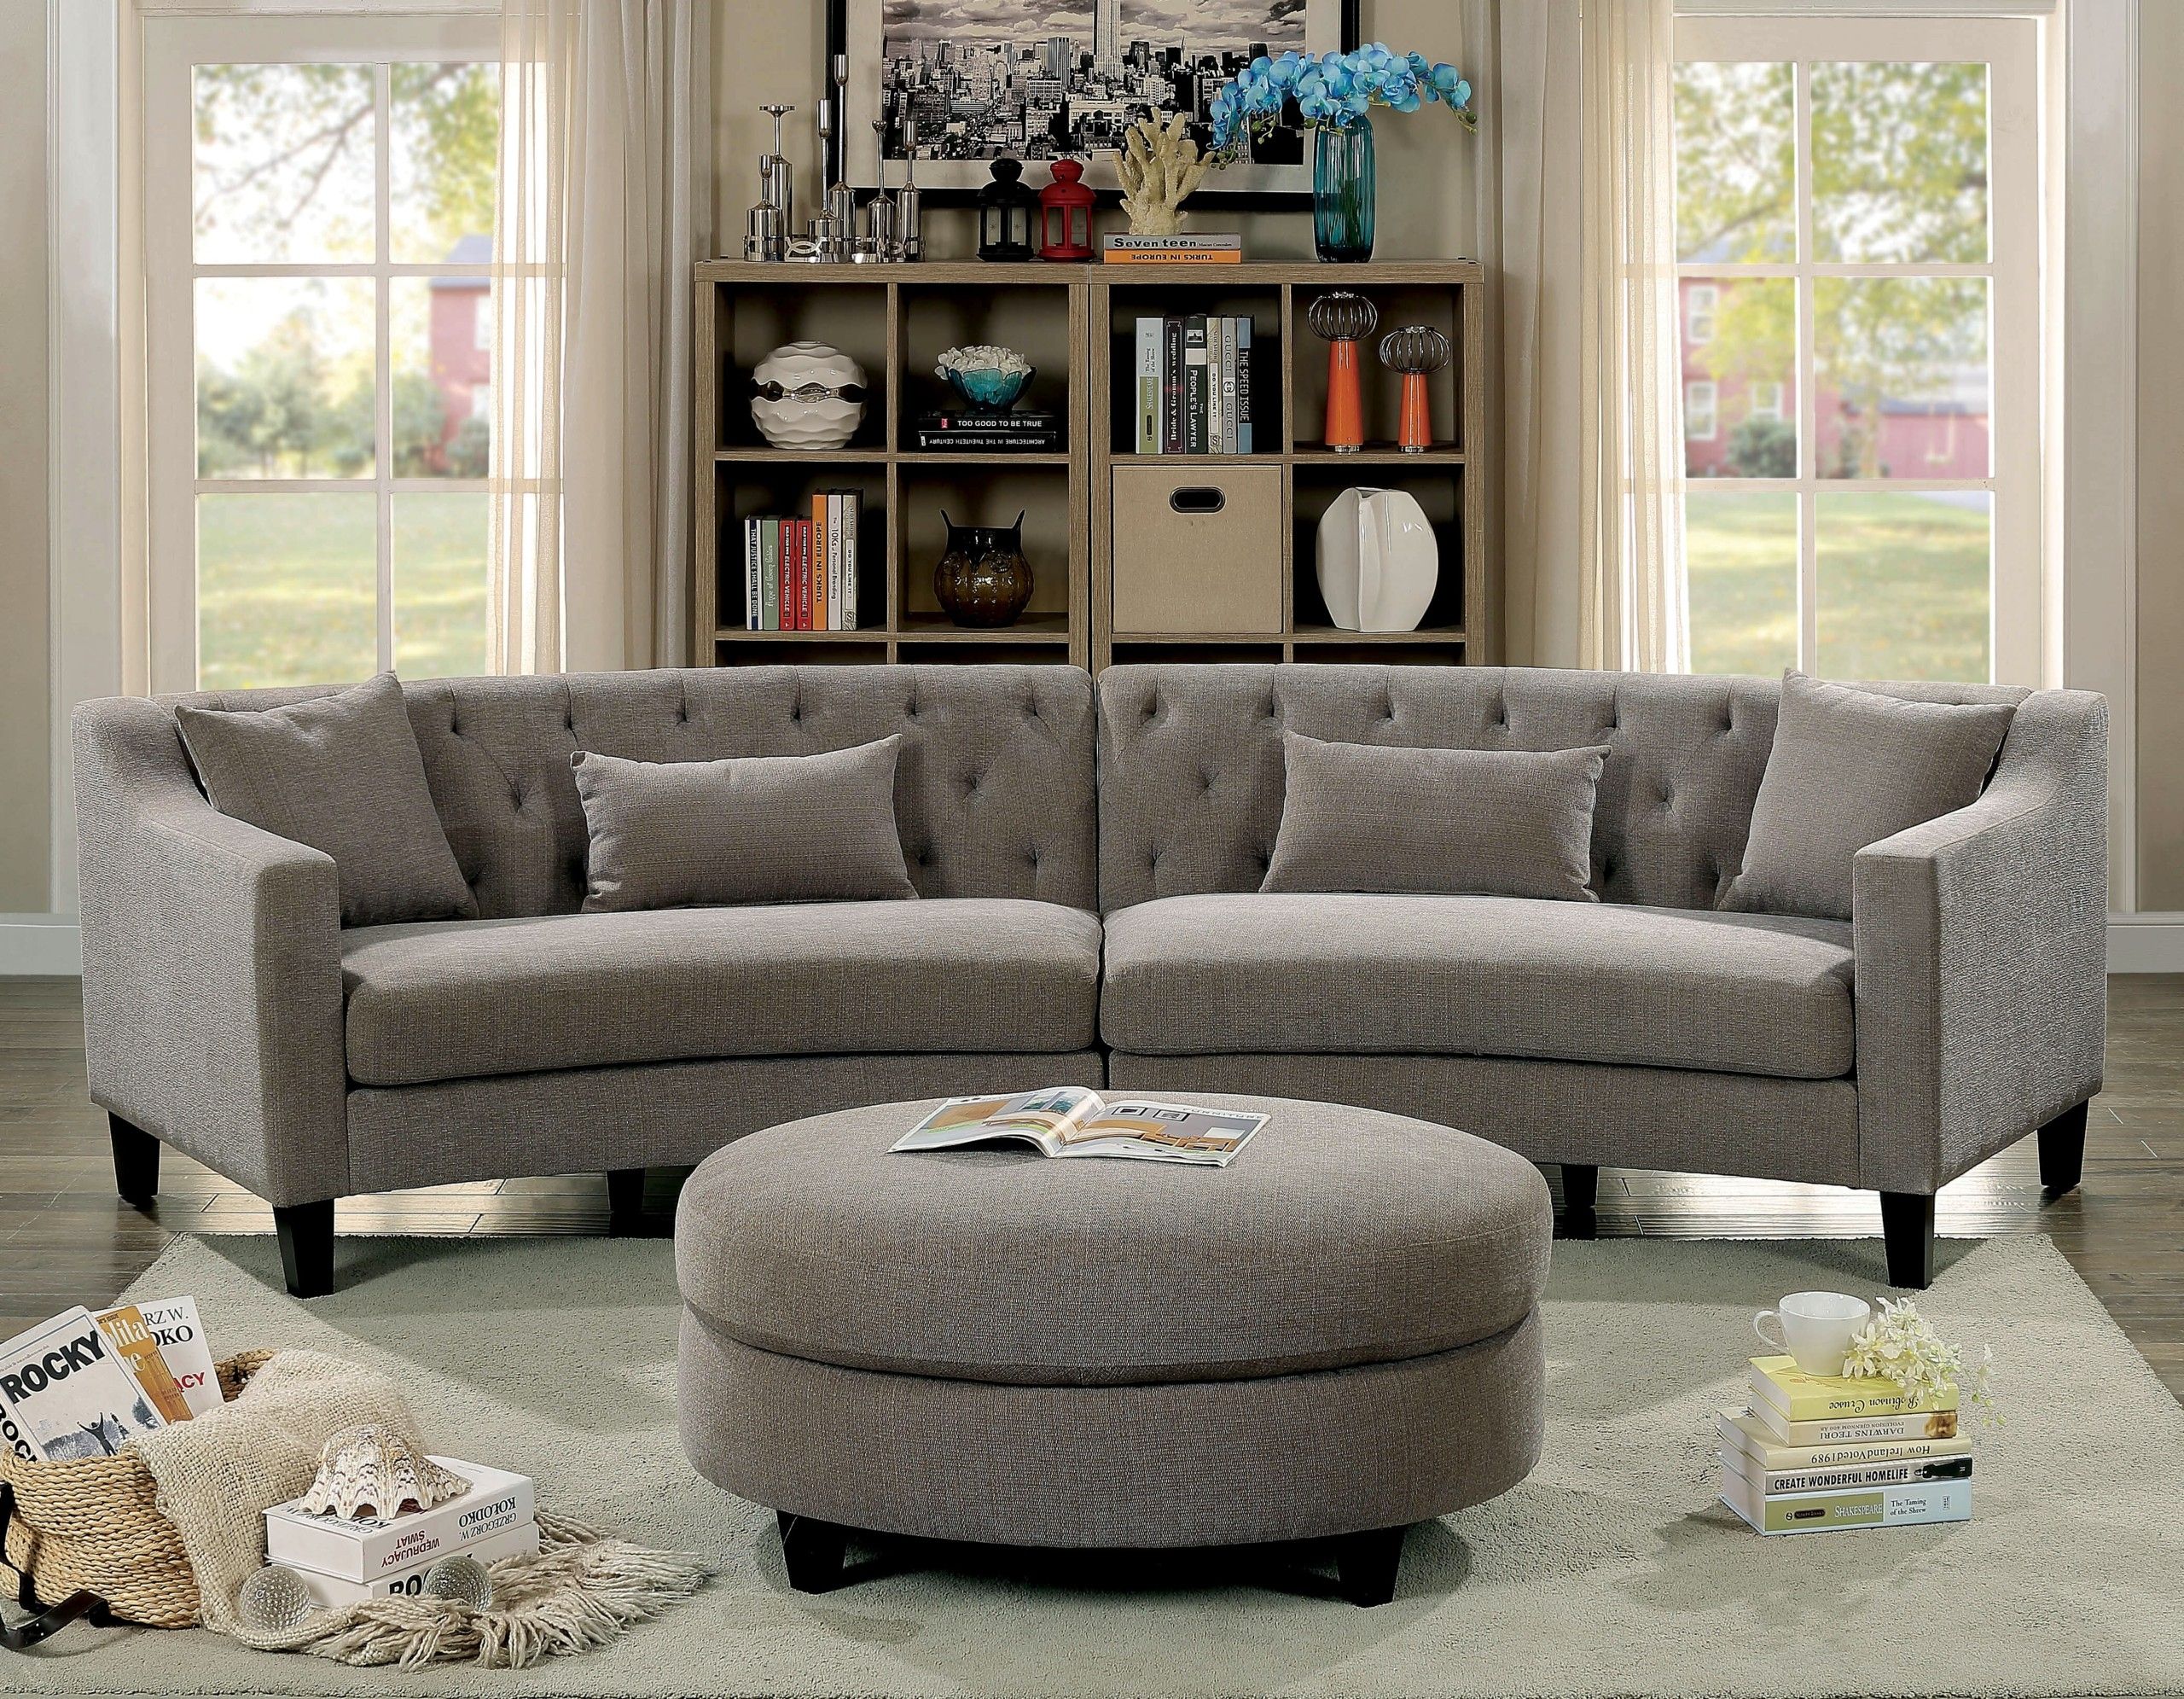 Small Curved Sectional Sofas / Couches – Ideas On Foter Regarding 3 Piece Curved Sectional Set (View 10 of 15)